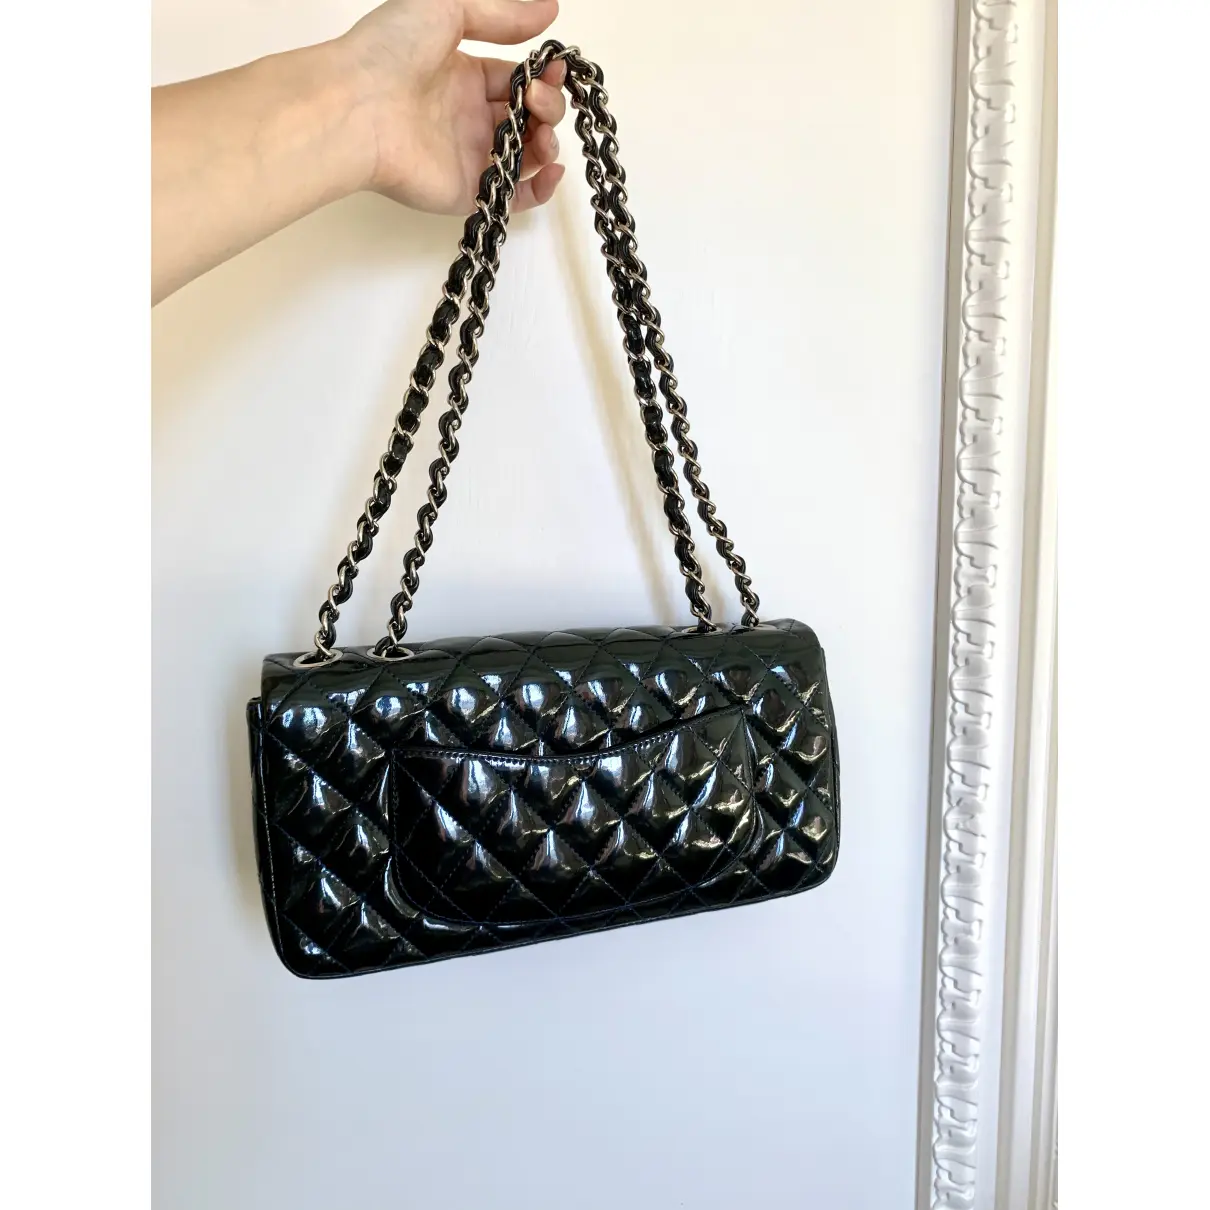 Buy Chanel Timeless/Classique patent leather crossbody bag online